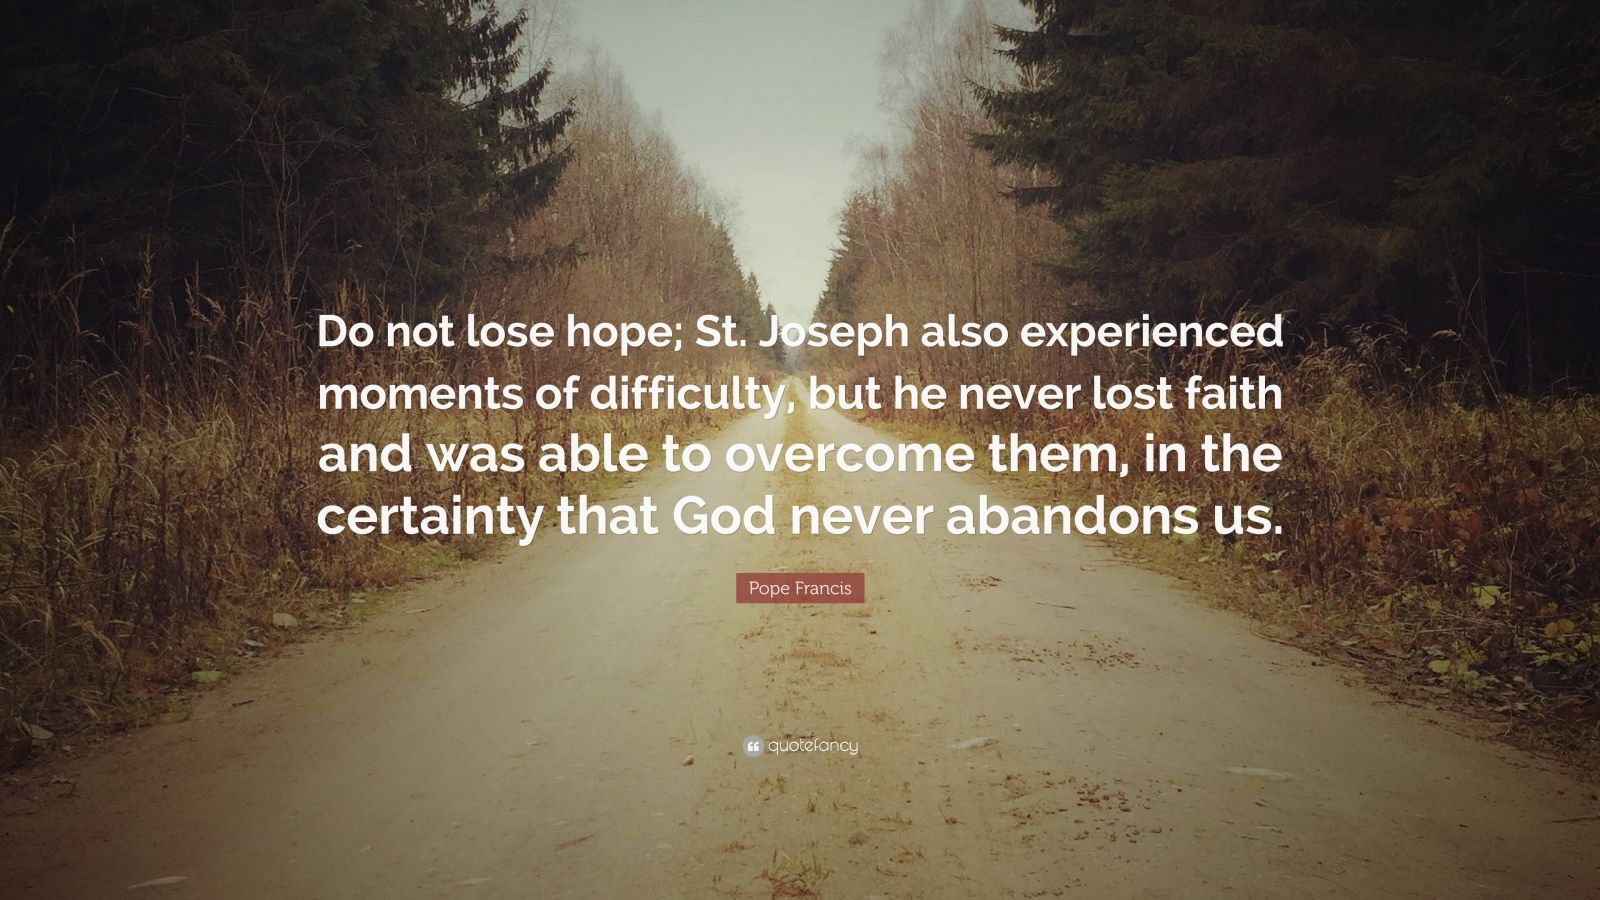 Pope Francis Quote: “Do not lose hope; St. Joseph also experienced